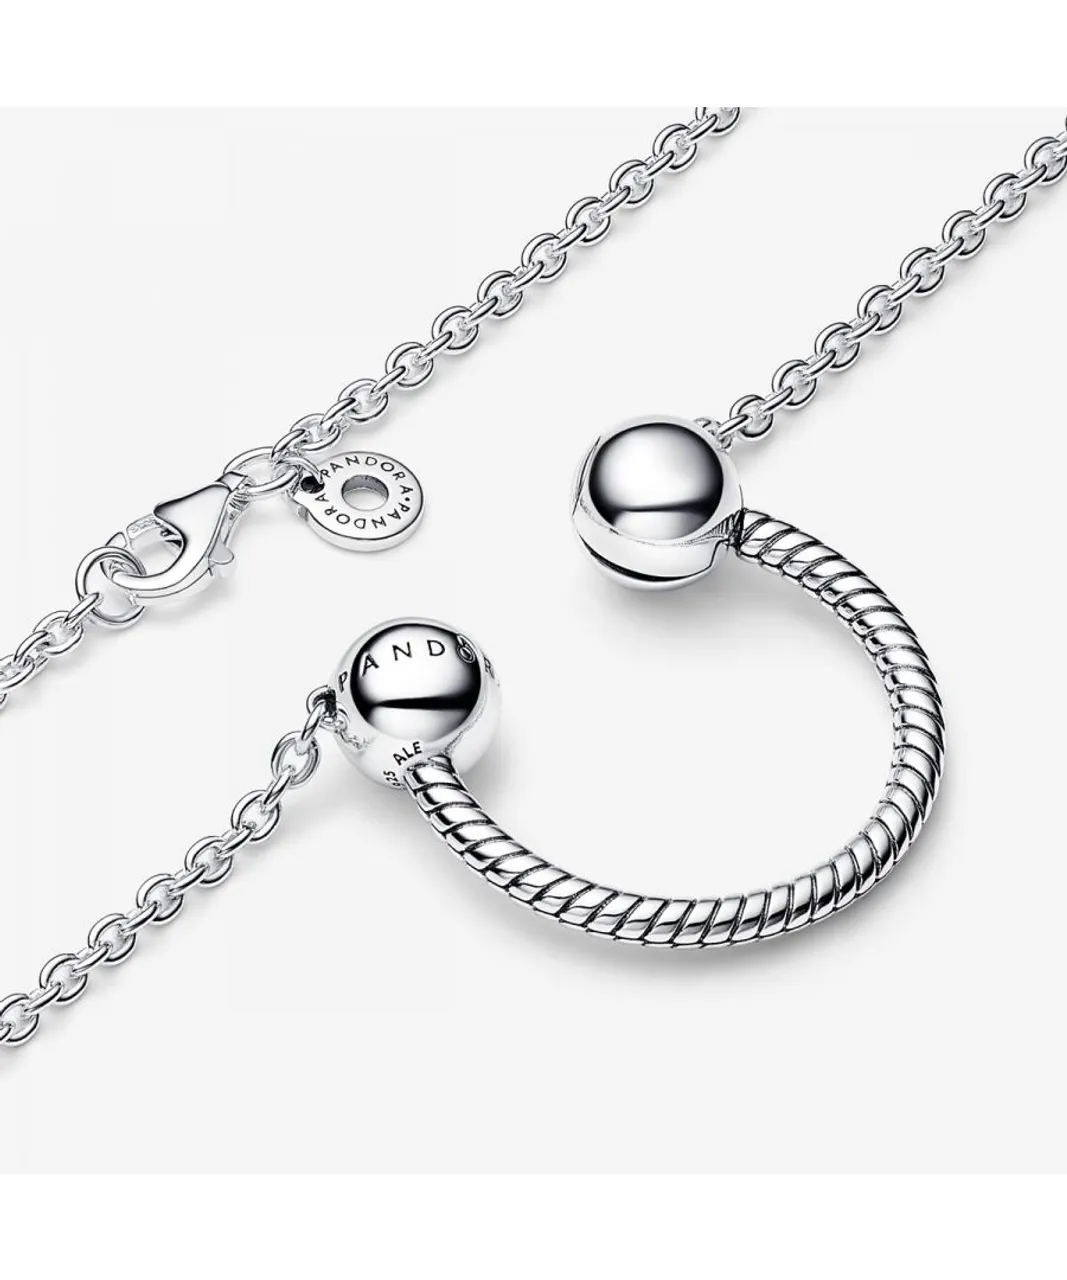 Pandora 'Moments' WoMens 925 Sterling Silver Necklace - 392747C00-45 - One Size